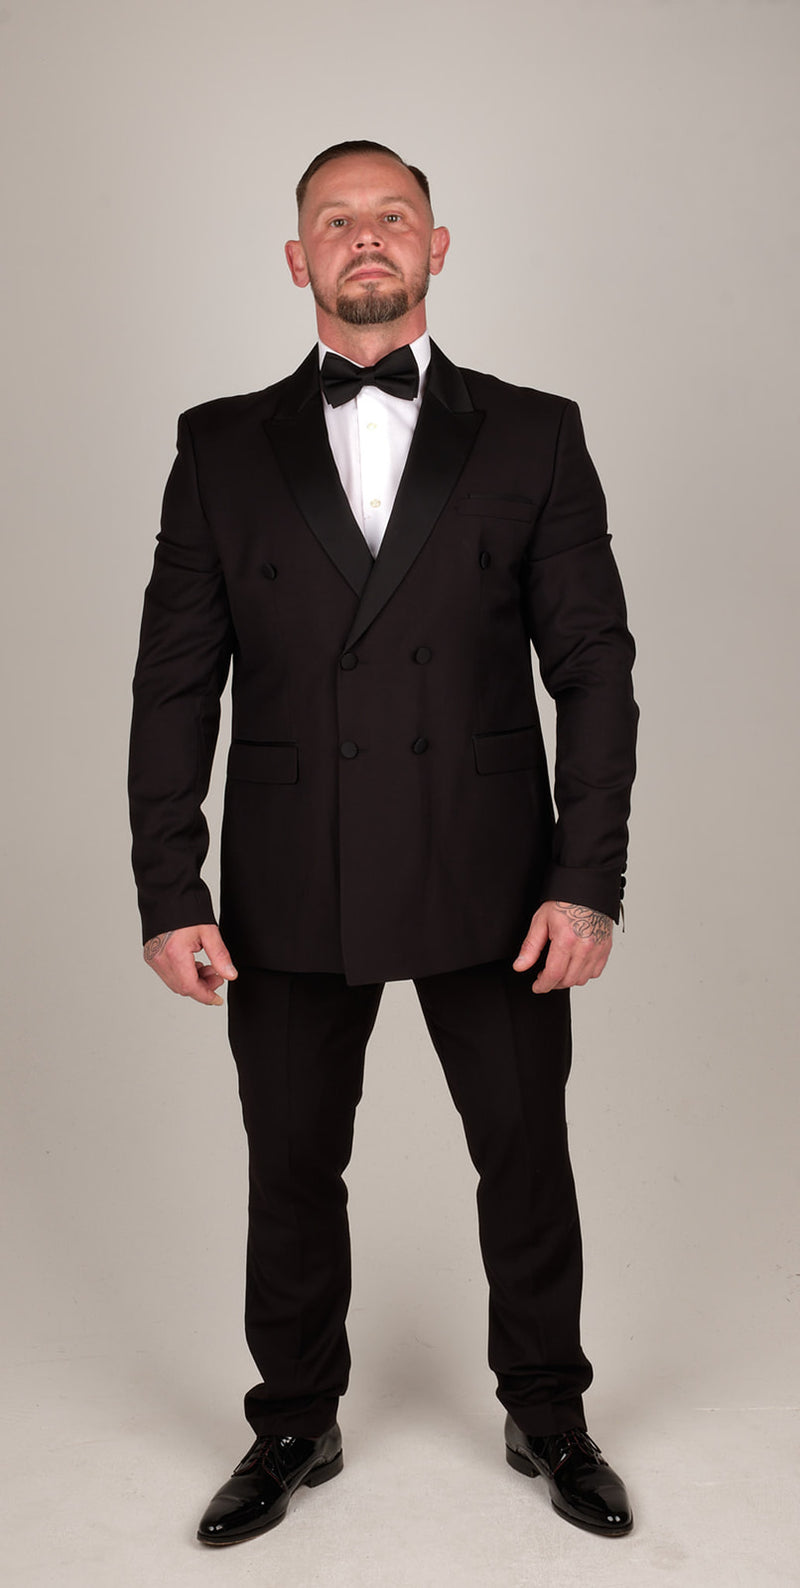 * Mens Complete 3 Piece Tuxedo Dinner Suit  * Complete With Blazer Jacket, Waistcoat & Suit Carrier  * Perfect For Any Formal or Smart Occasion Such As Parties, Weddings or Proms  * Amazing Black Fabric With Contrasting Satin Lapels & Trim, Tailored Fit (in between slim & regular fit)- Party Wear | Office Wear